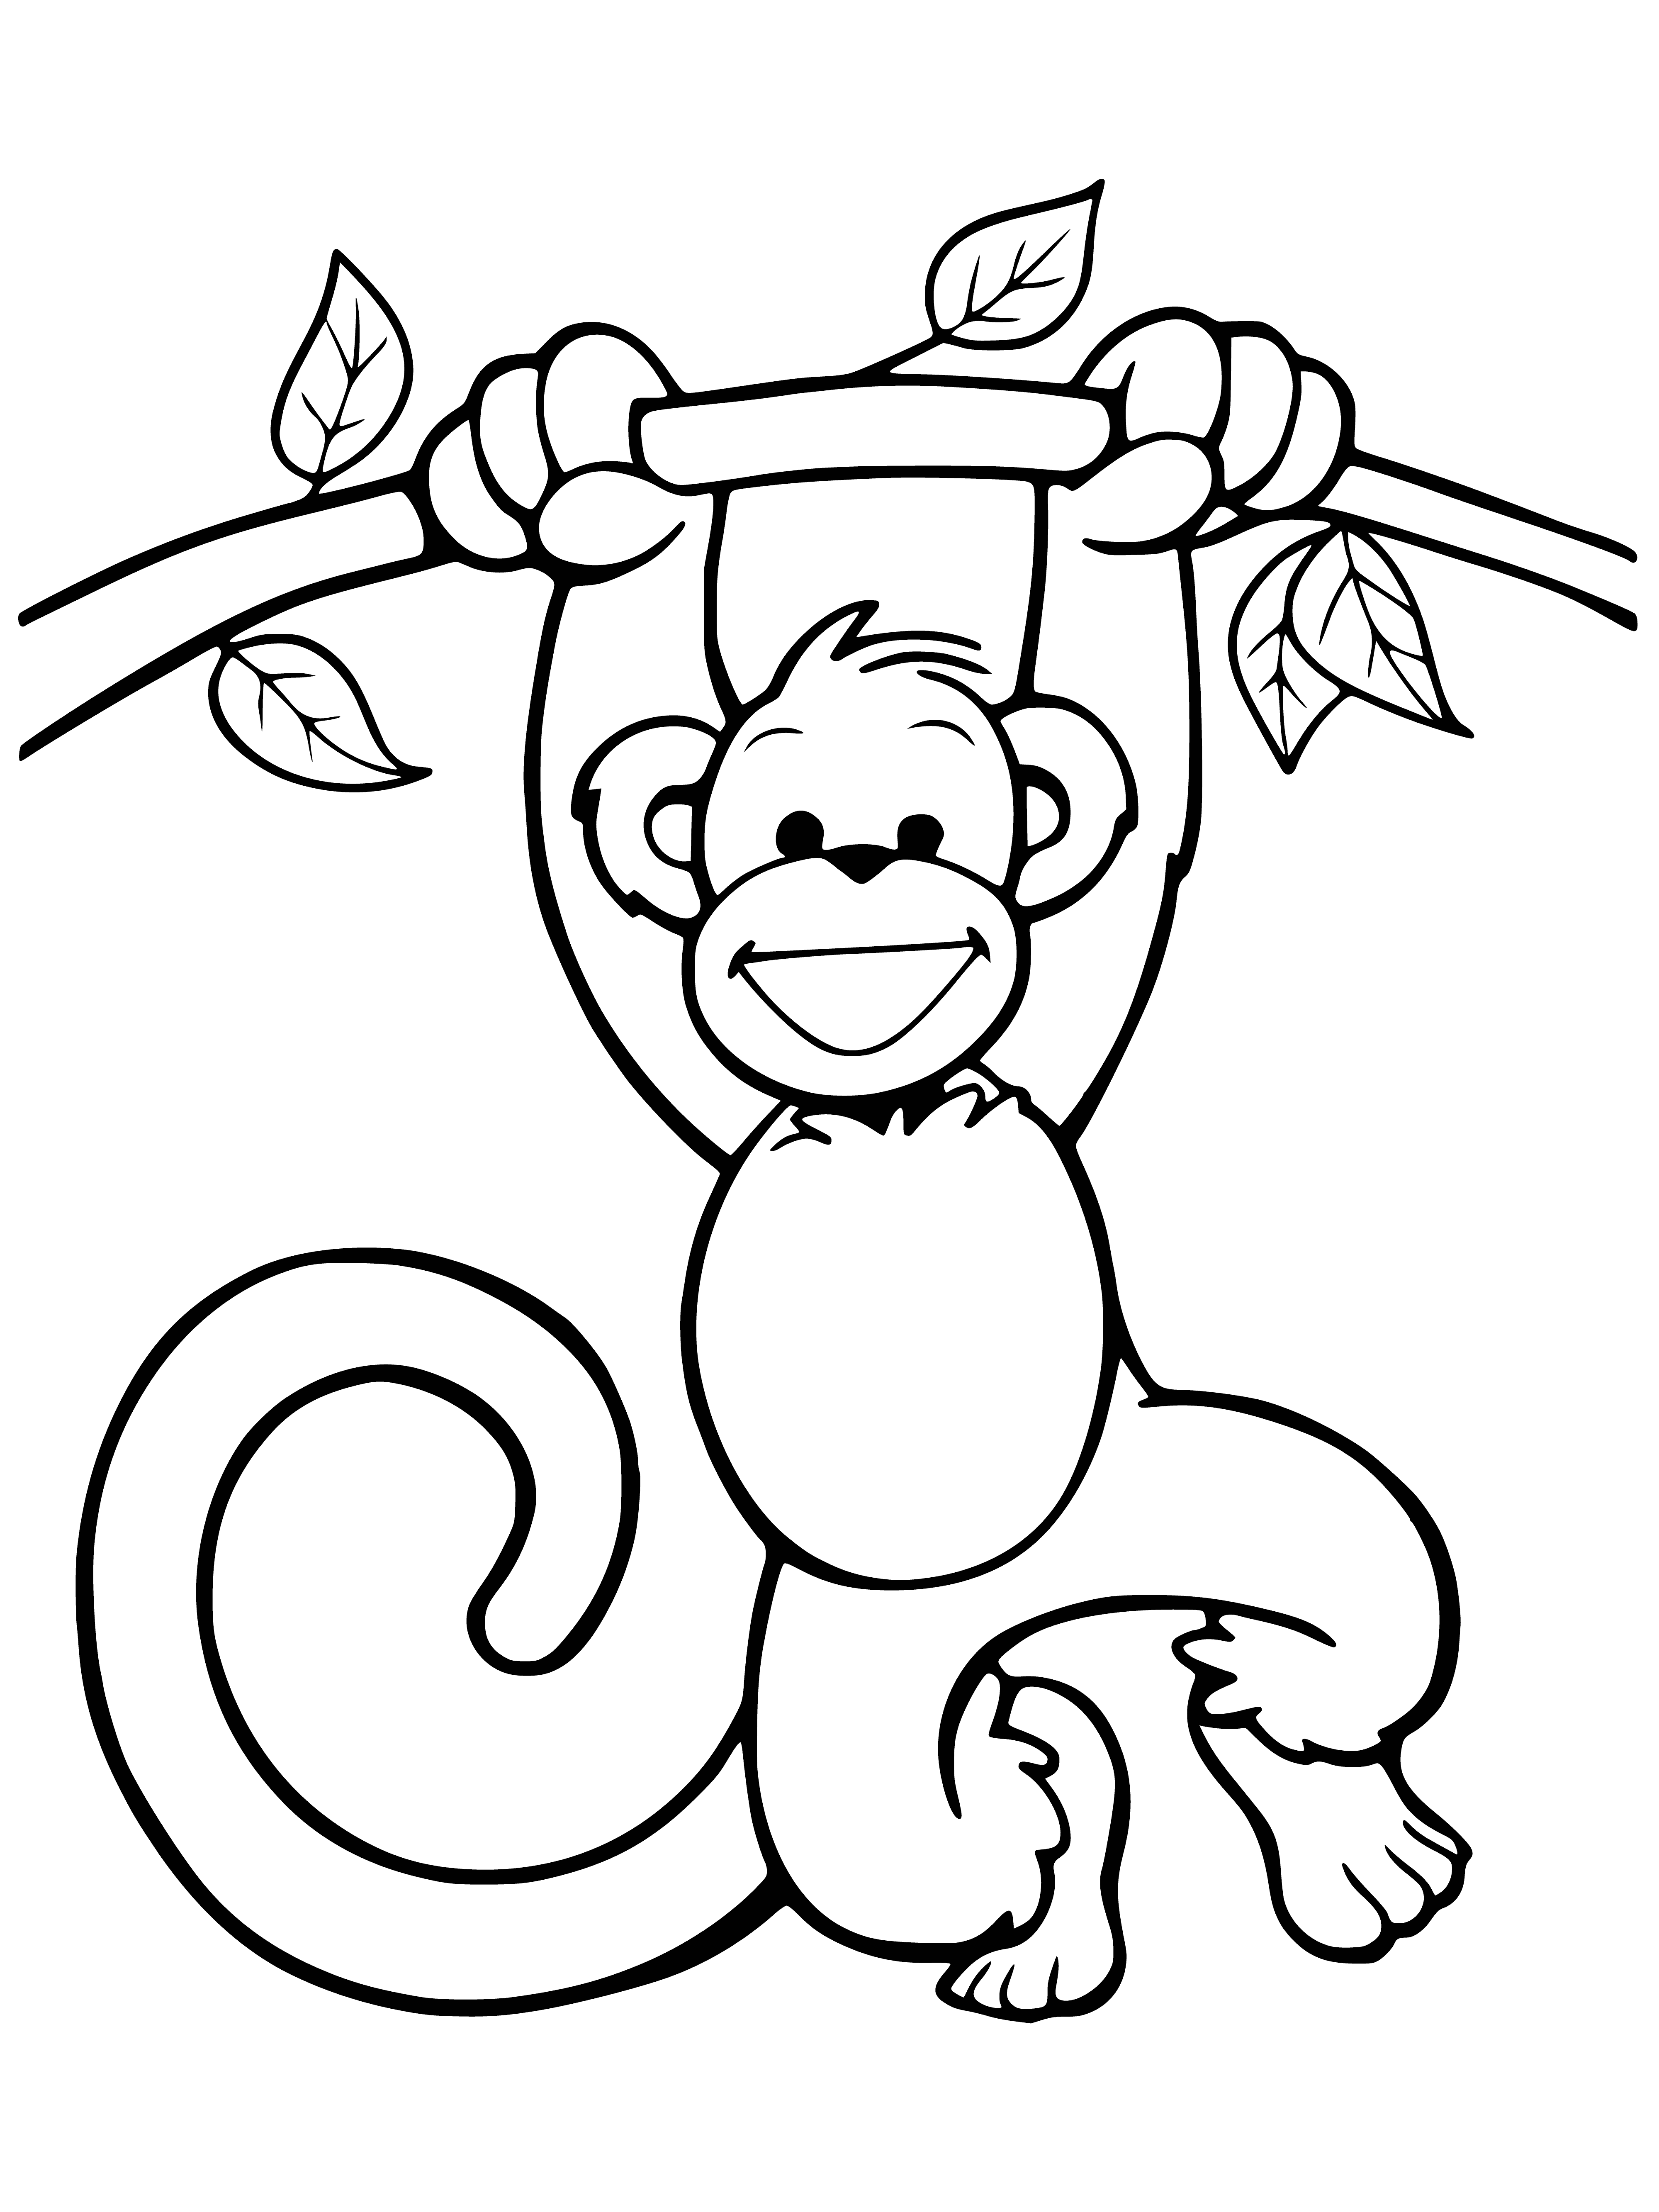 coloring page: A monkey climbs a tree while happy, holding a banana and sporting a fluffy brown fur with big ears and a long tail.